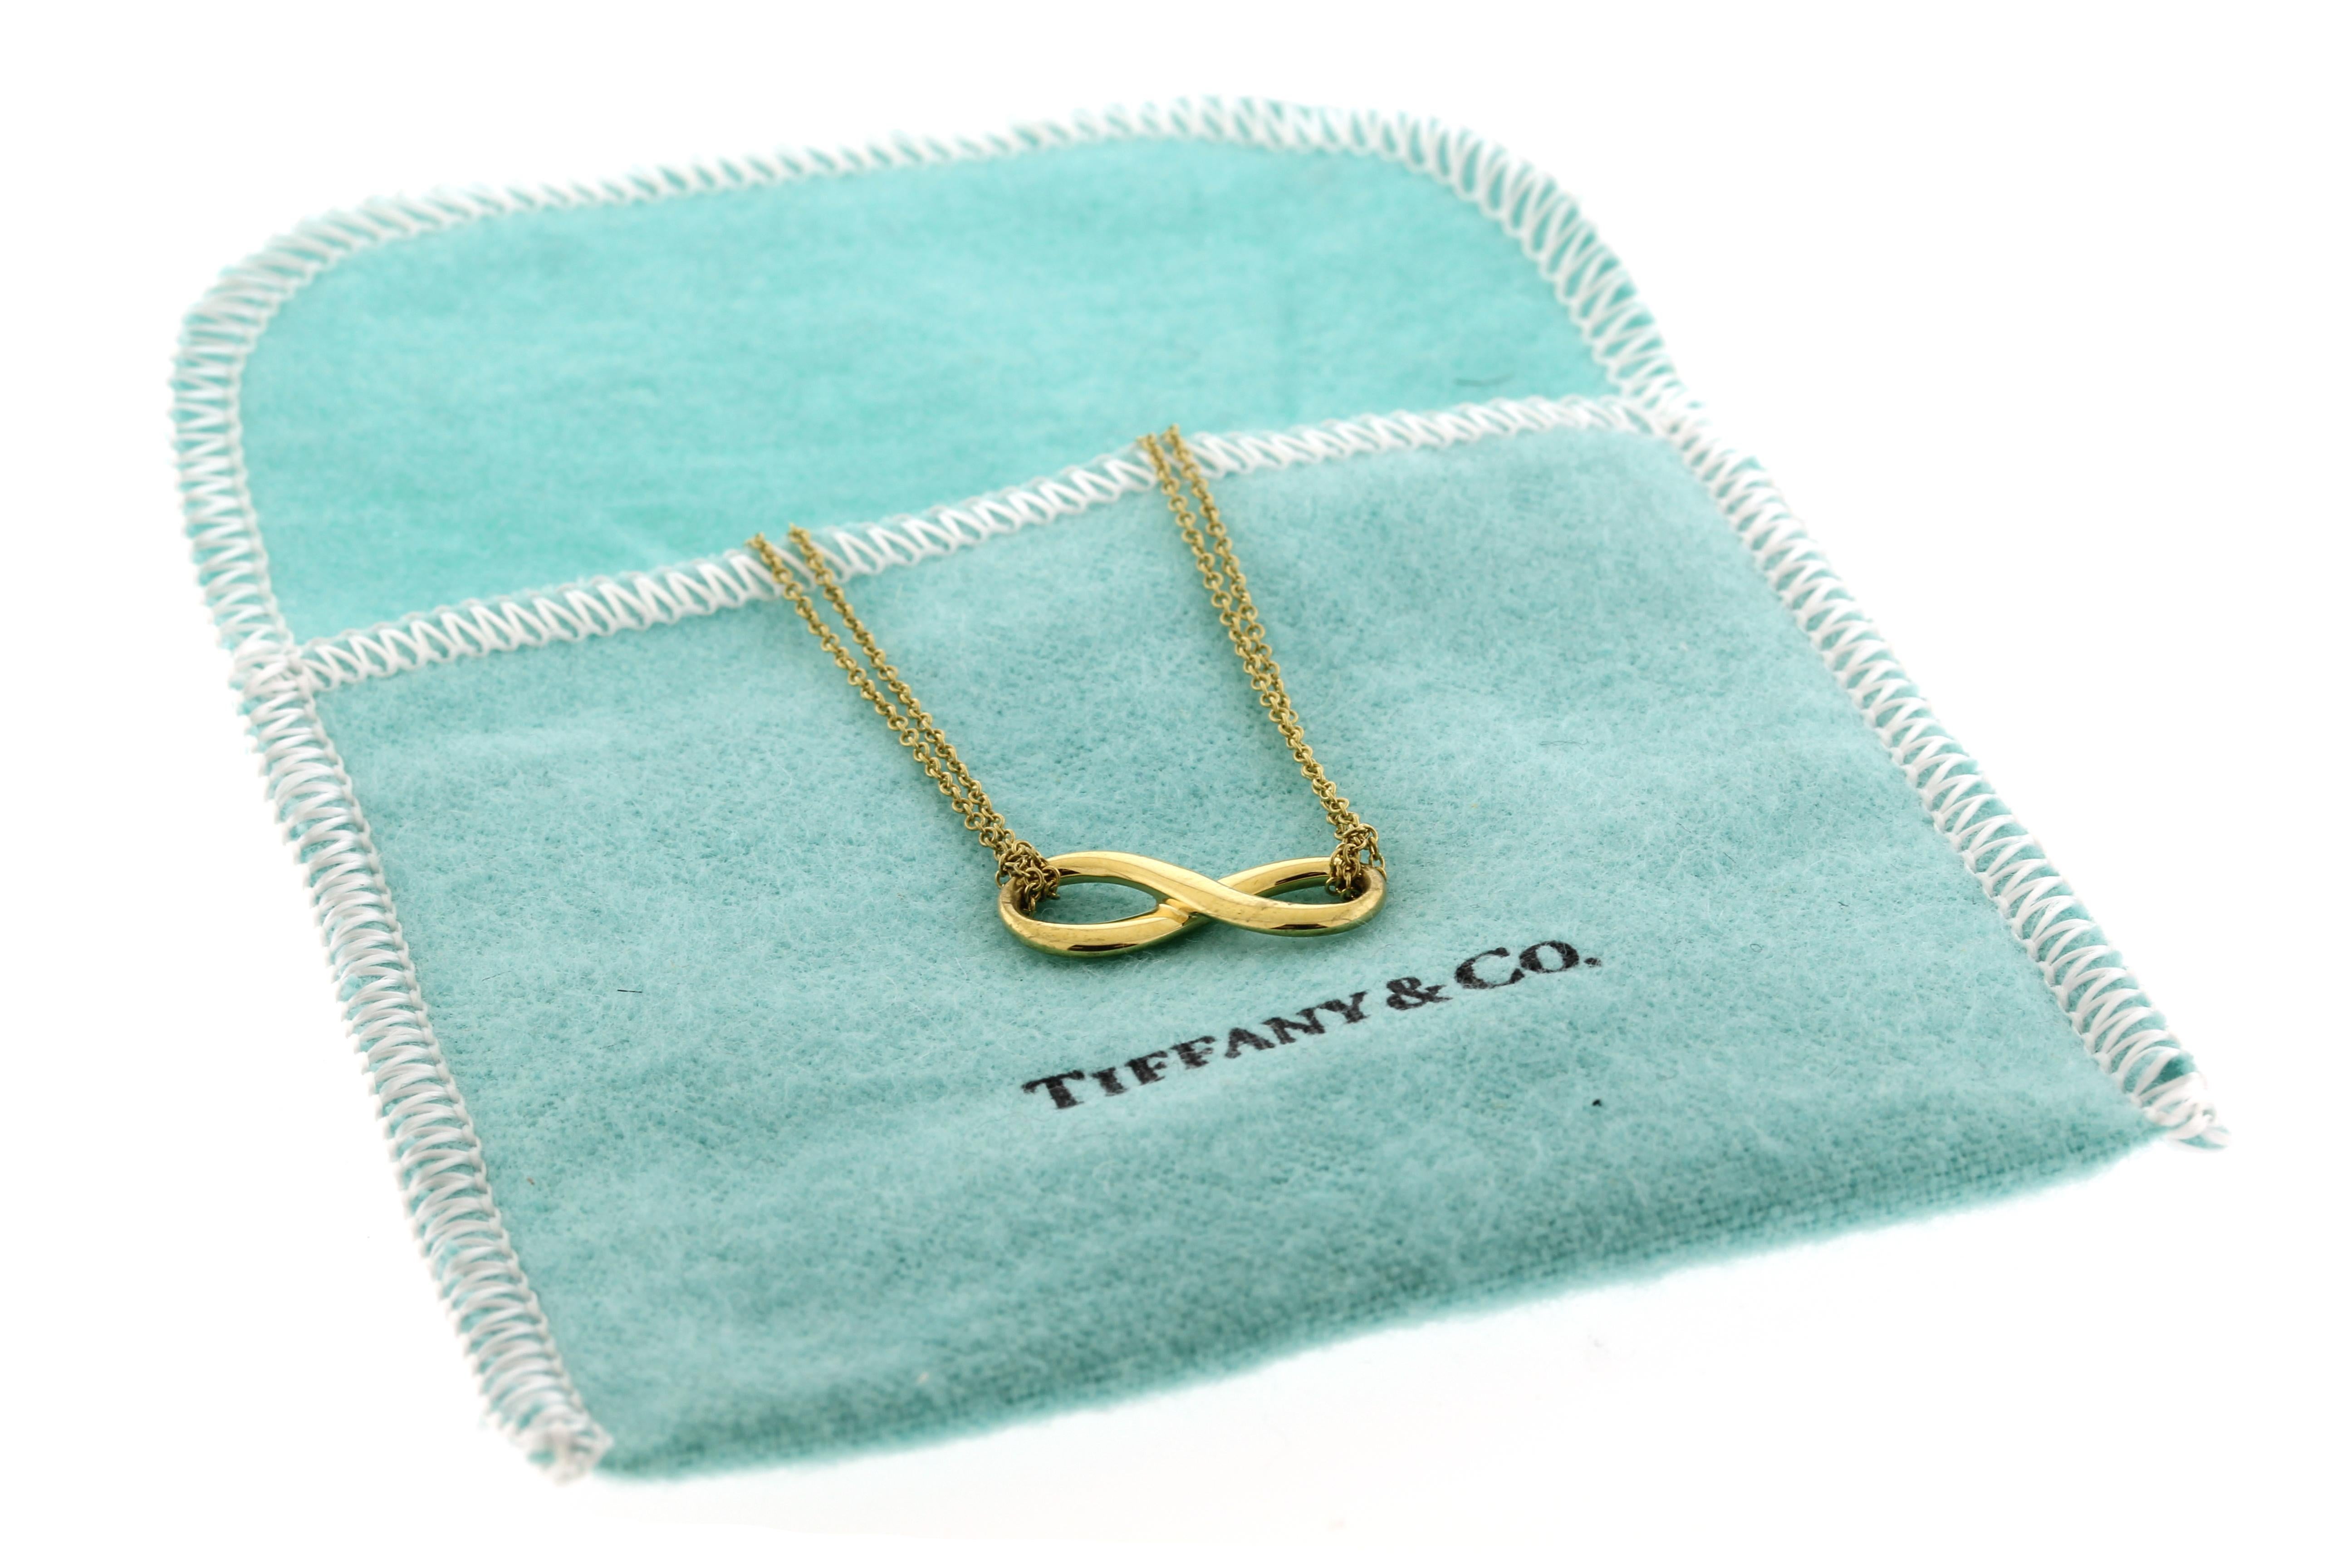 From Tiffany & Co, this infinity pendant necklace is 16 inches in length
• Metal: 18kt Yellow Gold
• Circa: 2010s
• Size: 20.02mm x8.2mm 
• Packaging: Tiffany pouch
• Condition: Excellent Condition